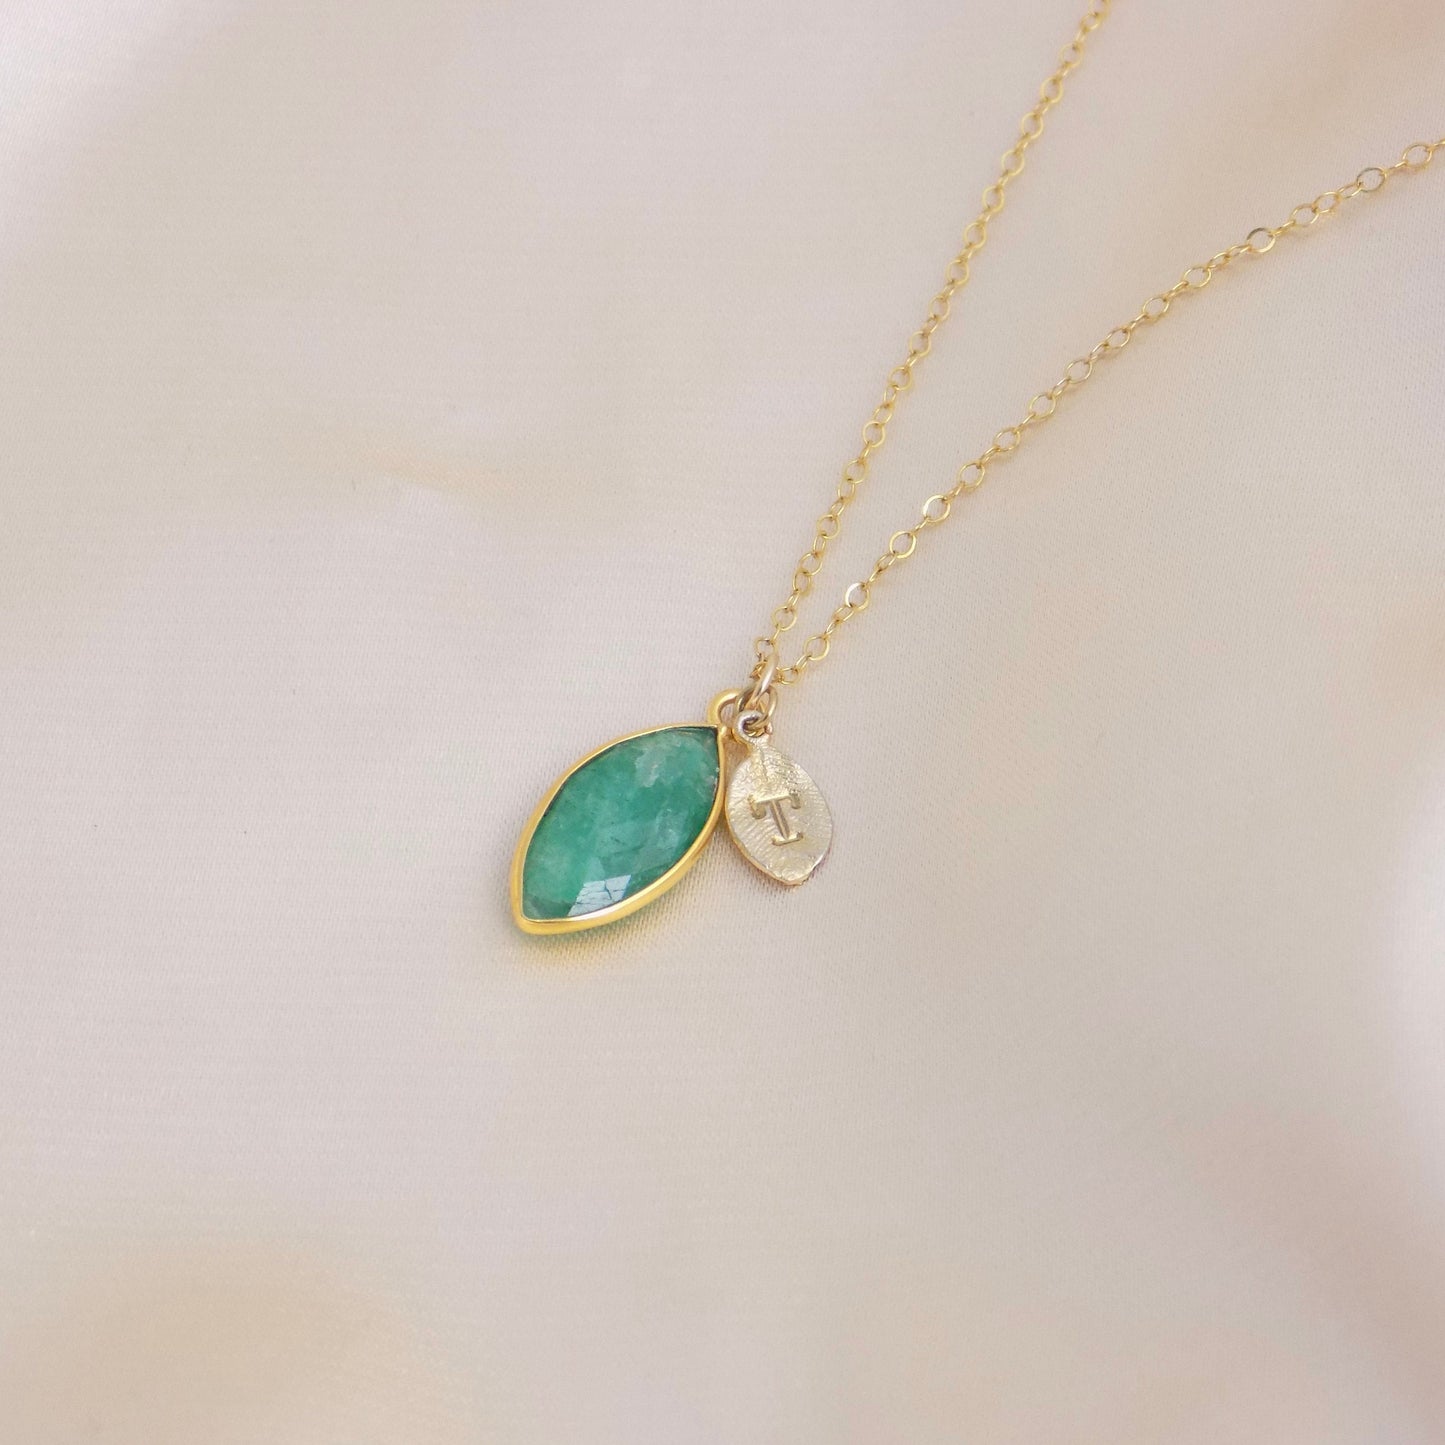 Personalized Gifts For Mom - Emerald Necklace